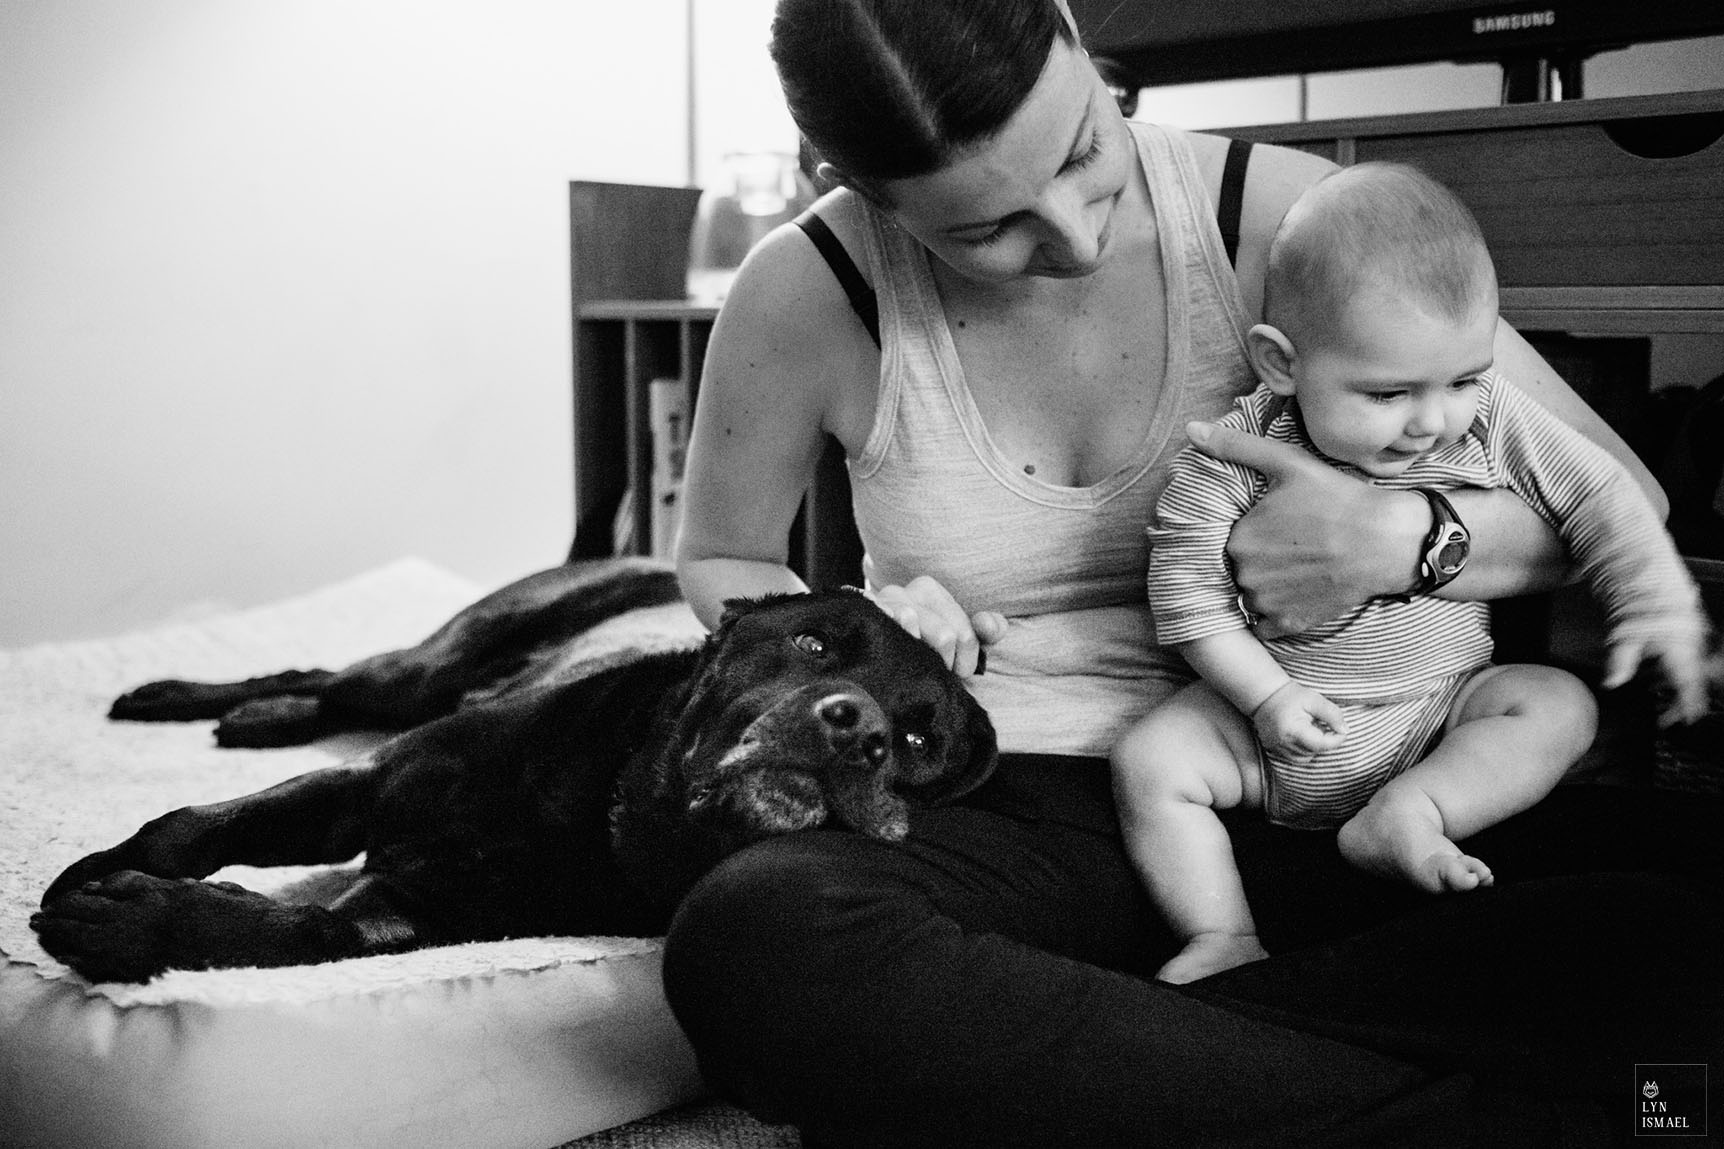 A black lab vies for attention as photographed by Kitchener family documentary photographer